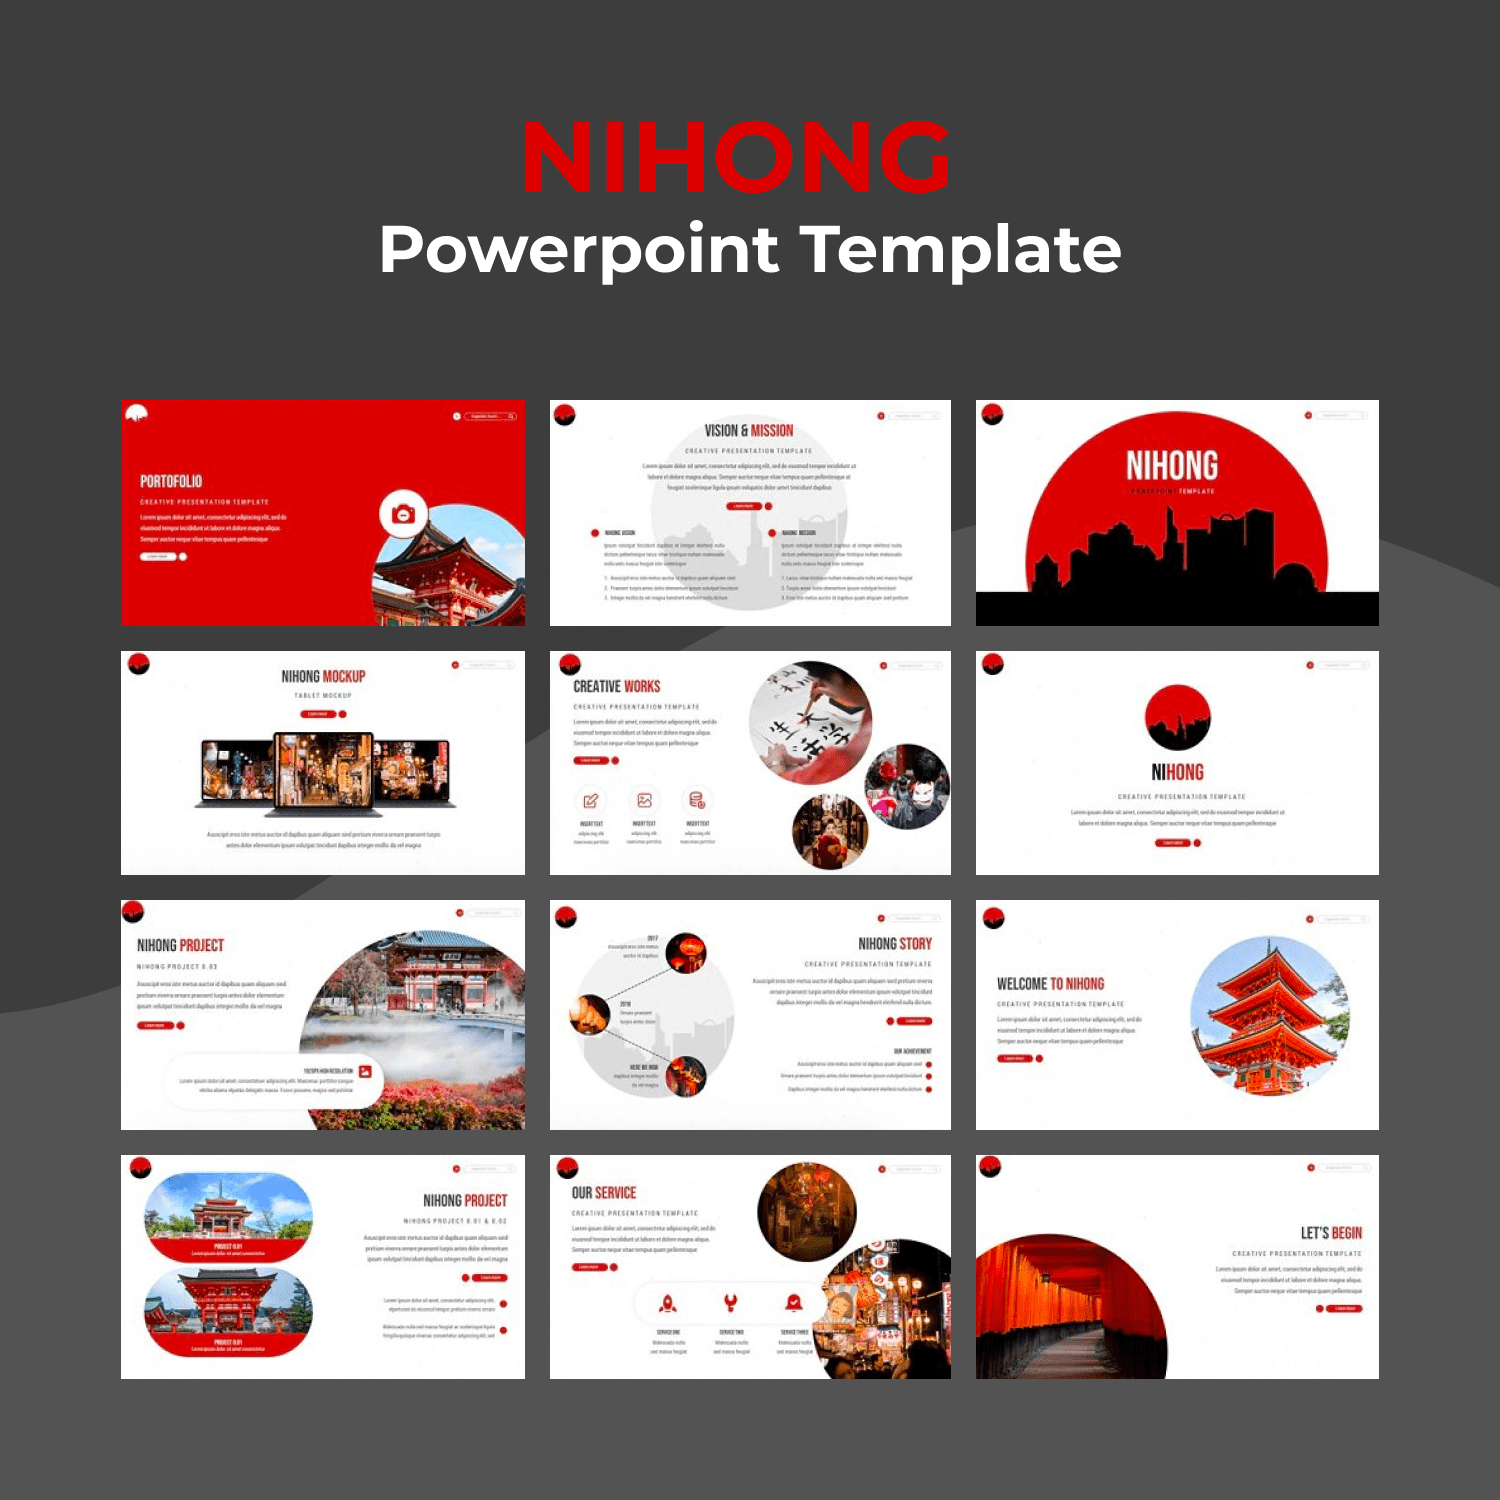 Nihong Powerpoint Template main cover.